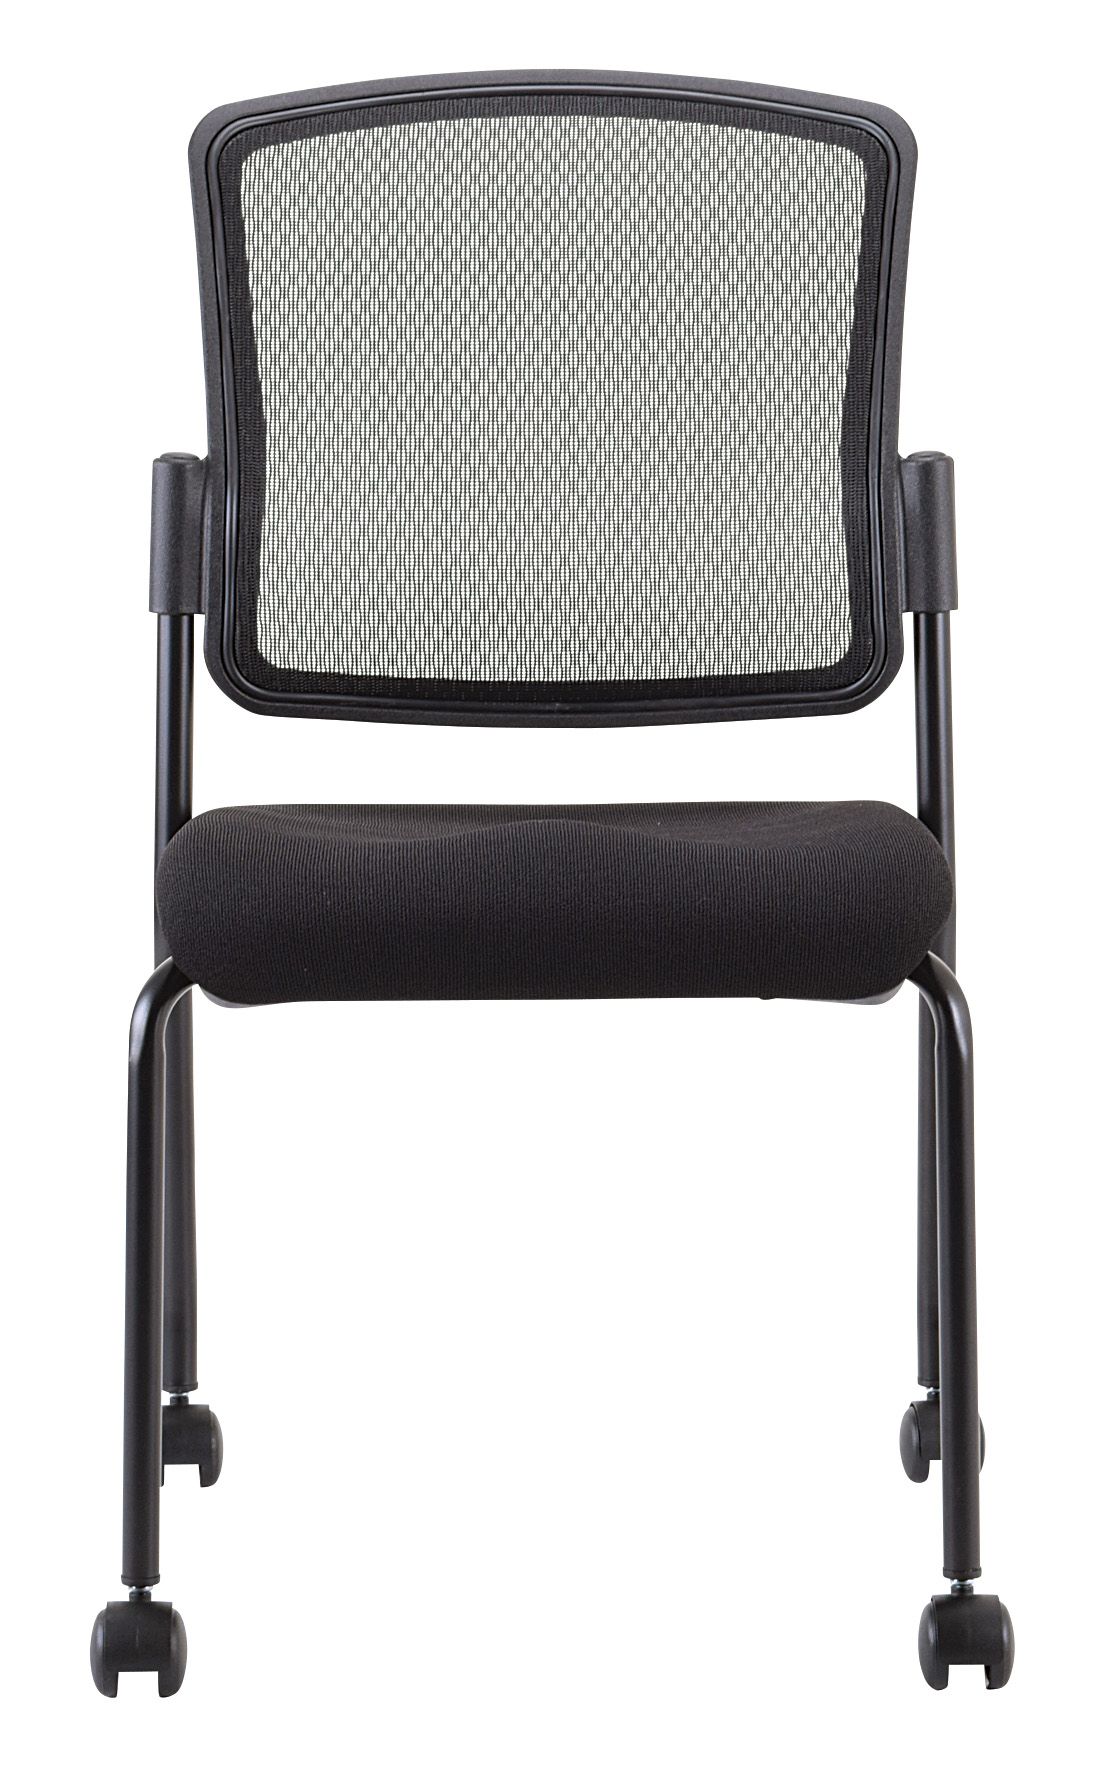 Black Mesh Rolling Office Chair-372336-1